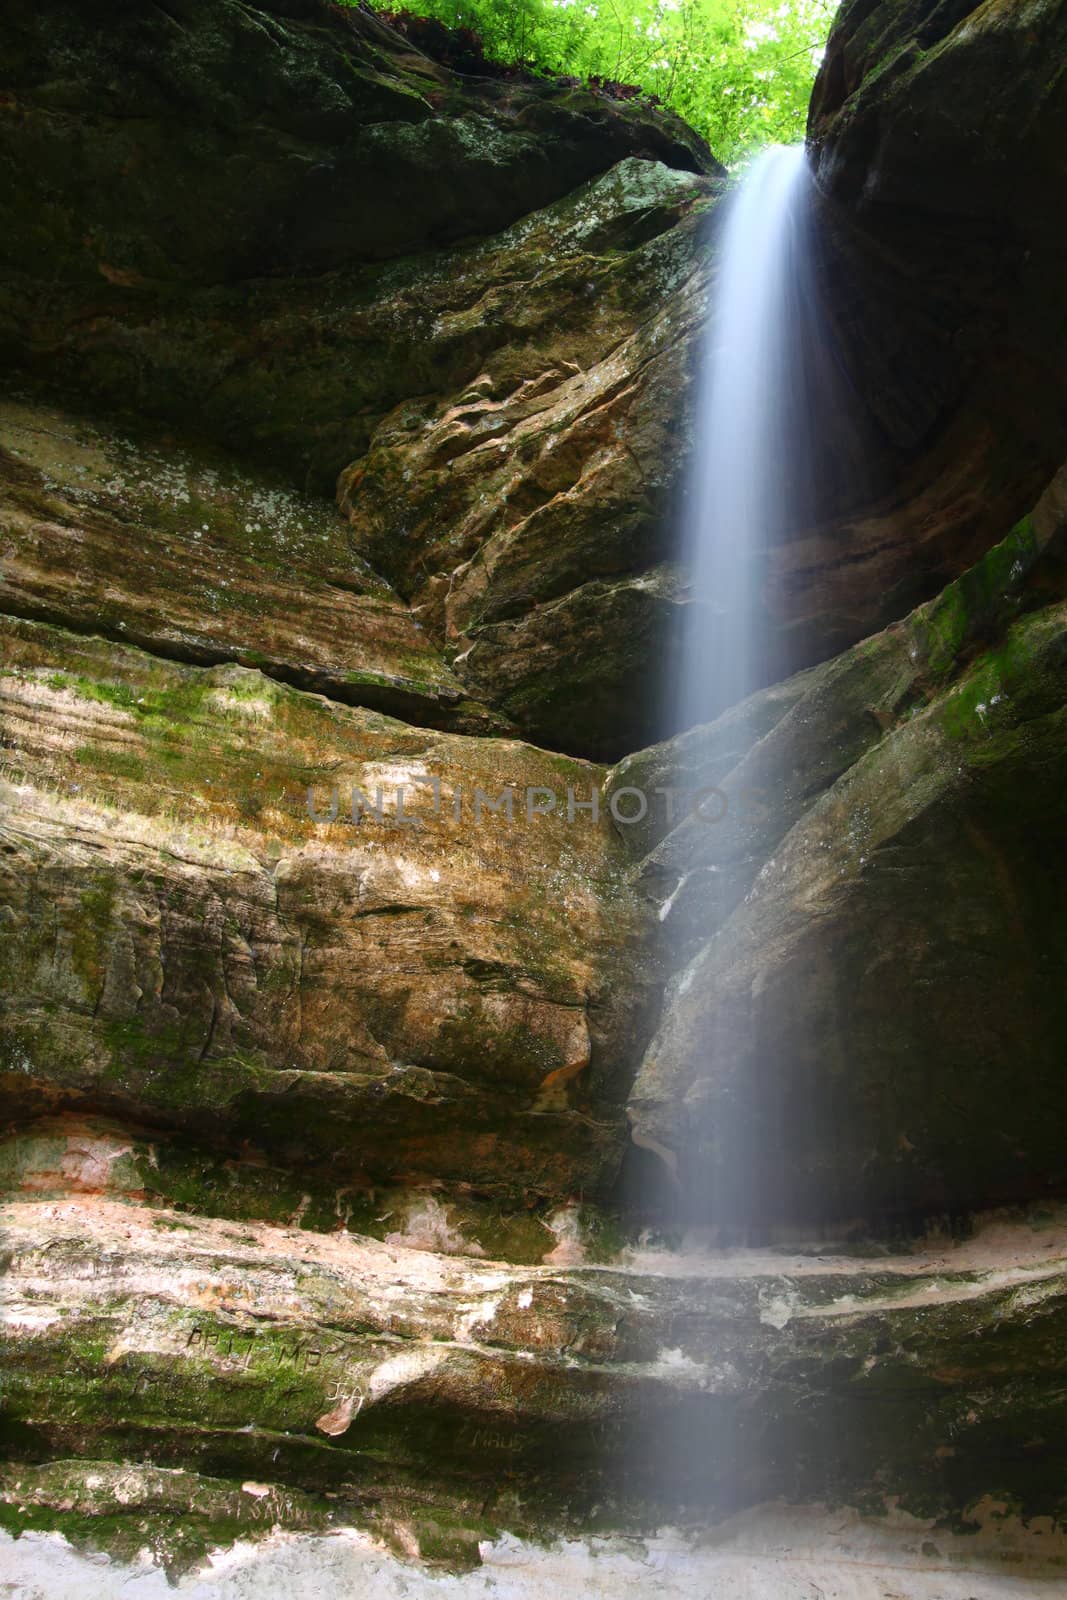 Water flows over beautiful Owl Canyon Falls at Starved Rock State Park of Illinois.